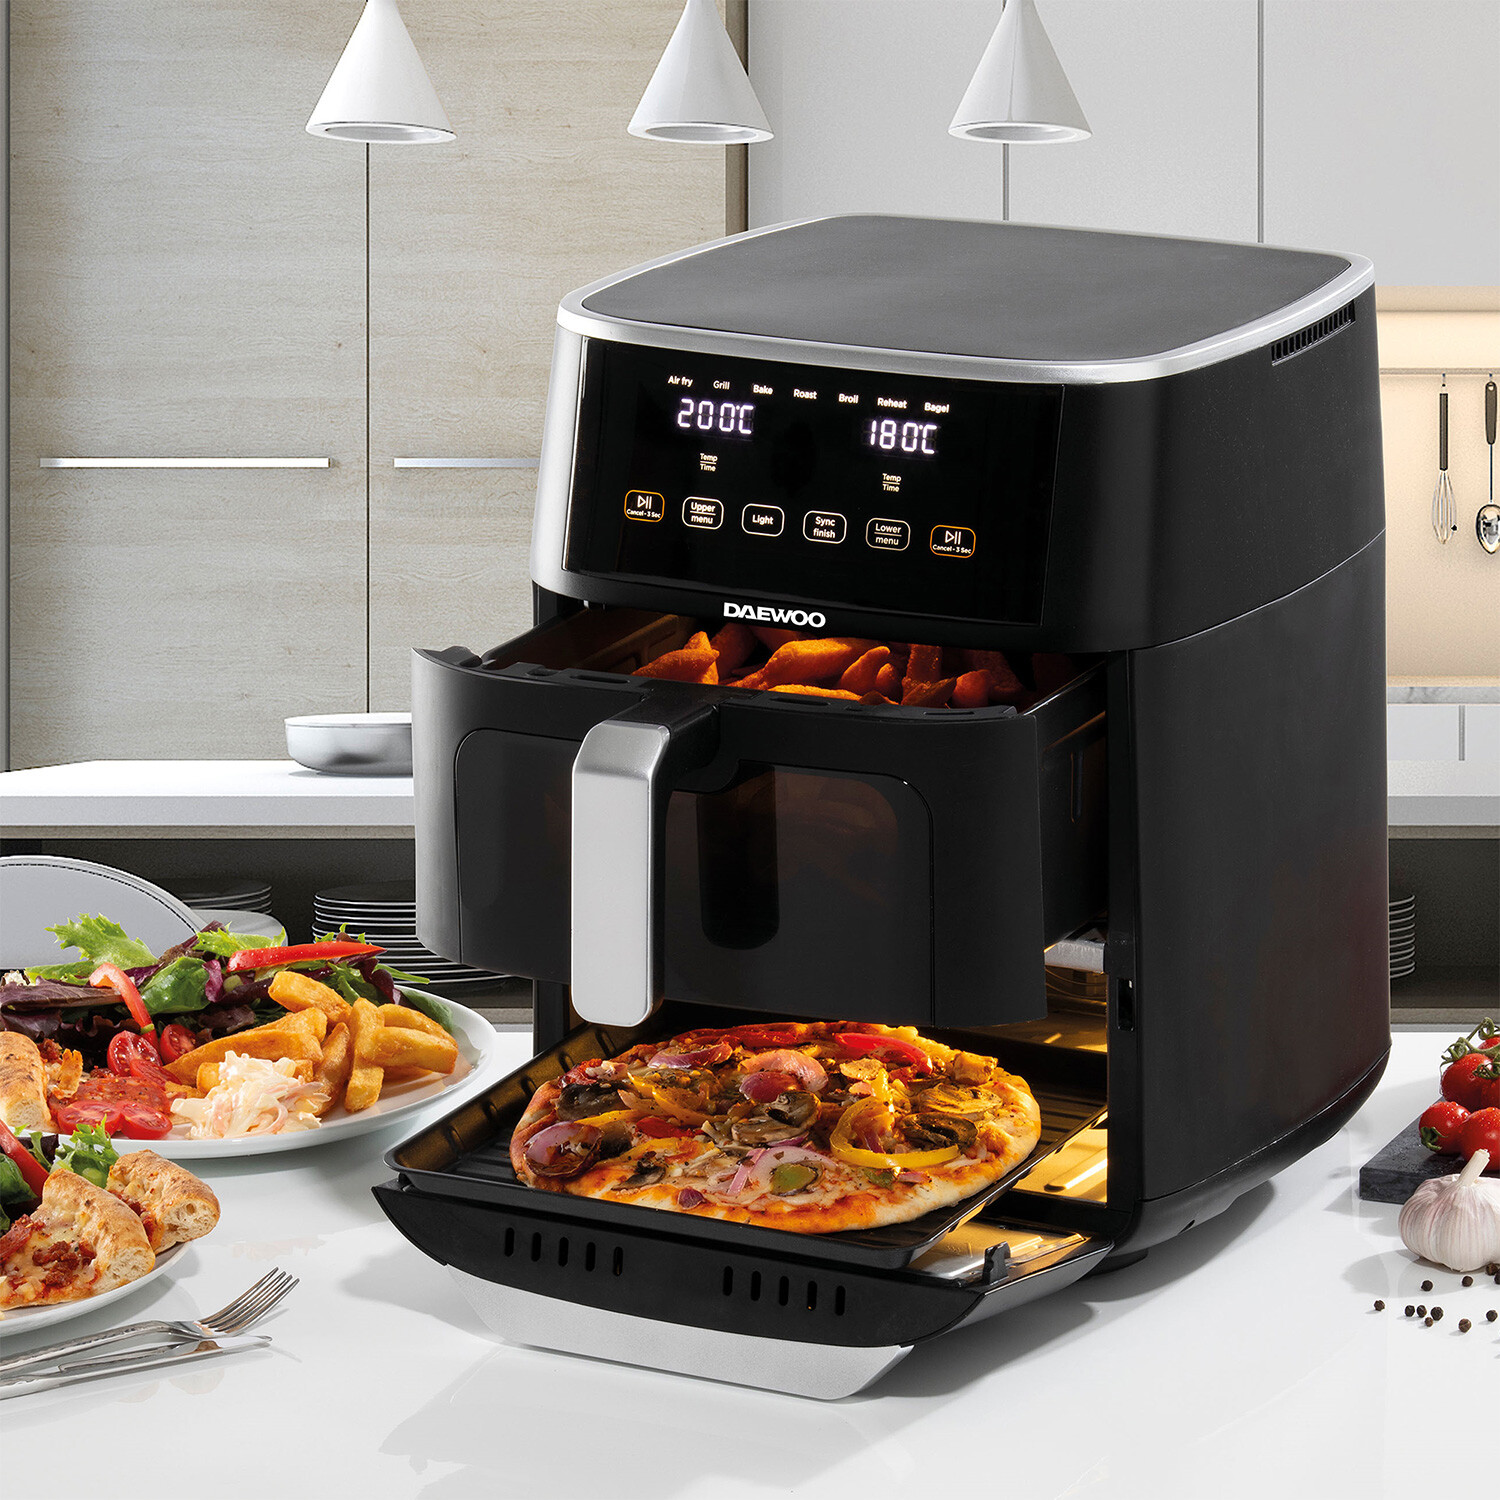 Daewoo 2-in-1 Air Fryer & Pizza Oven - Black Image 2